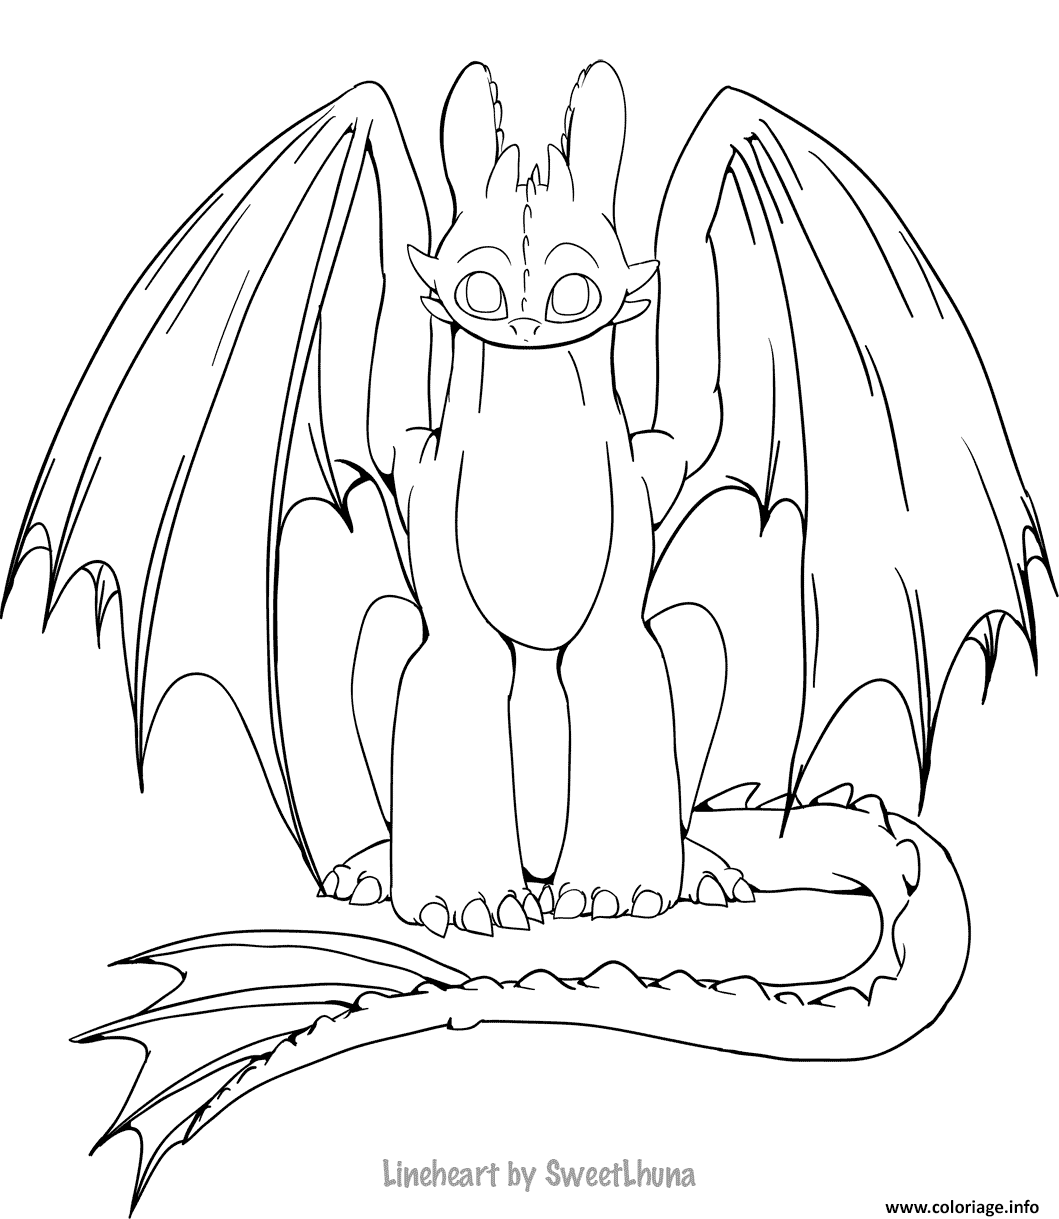 Dessin toothless lineheart by SweetLhuna Coloriage Gratuit à Imprimer